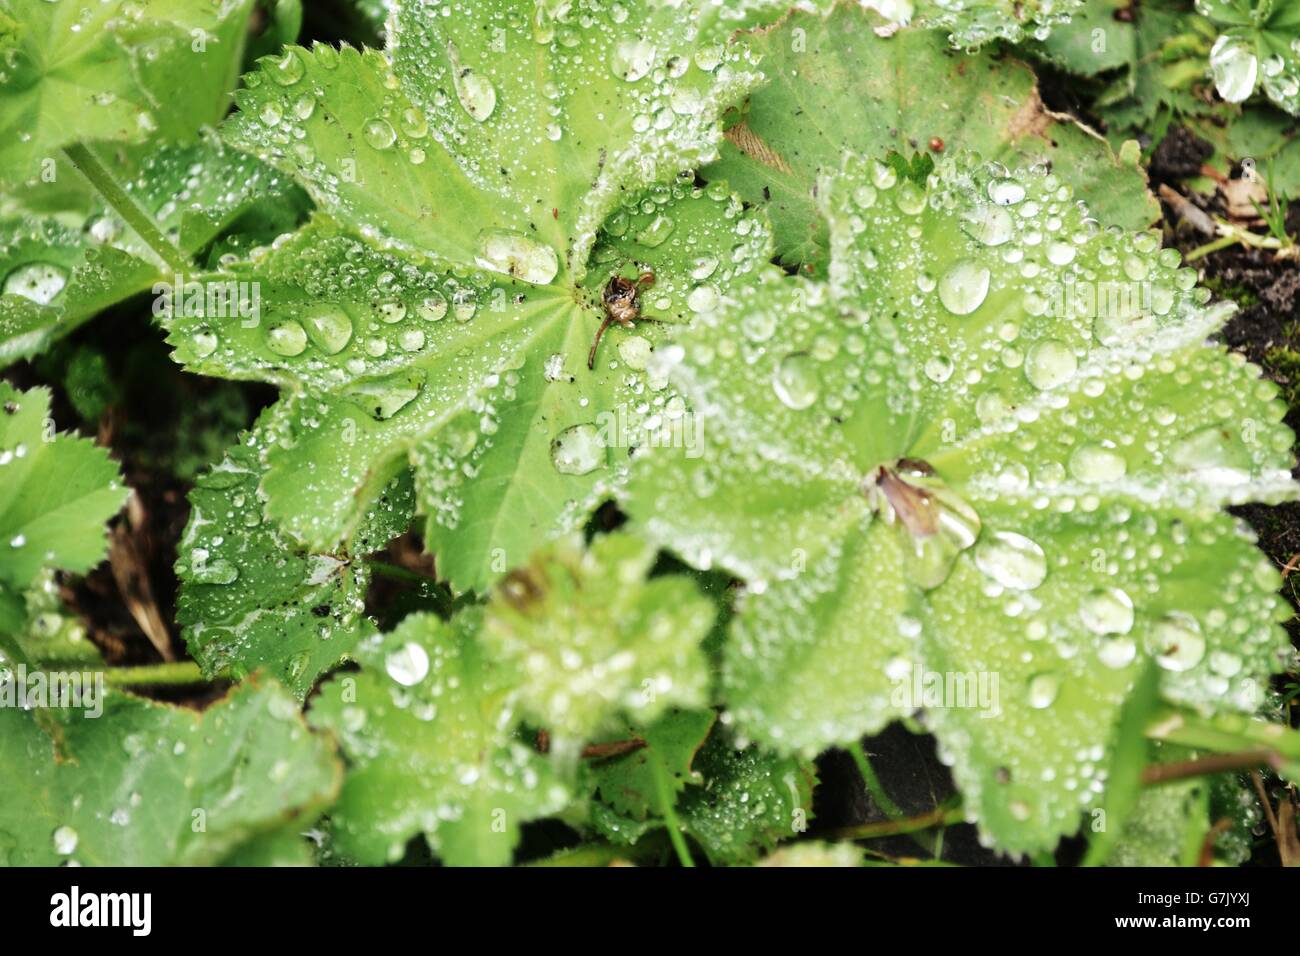 wet green foliage in a hedgerow with water droplets on leaves Stock Photo